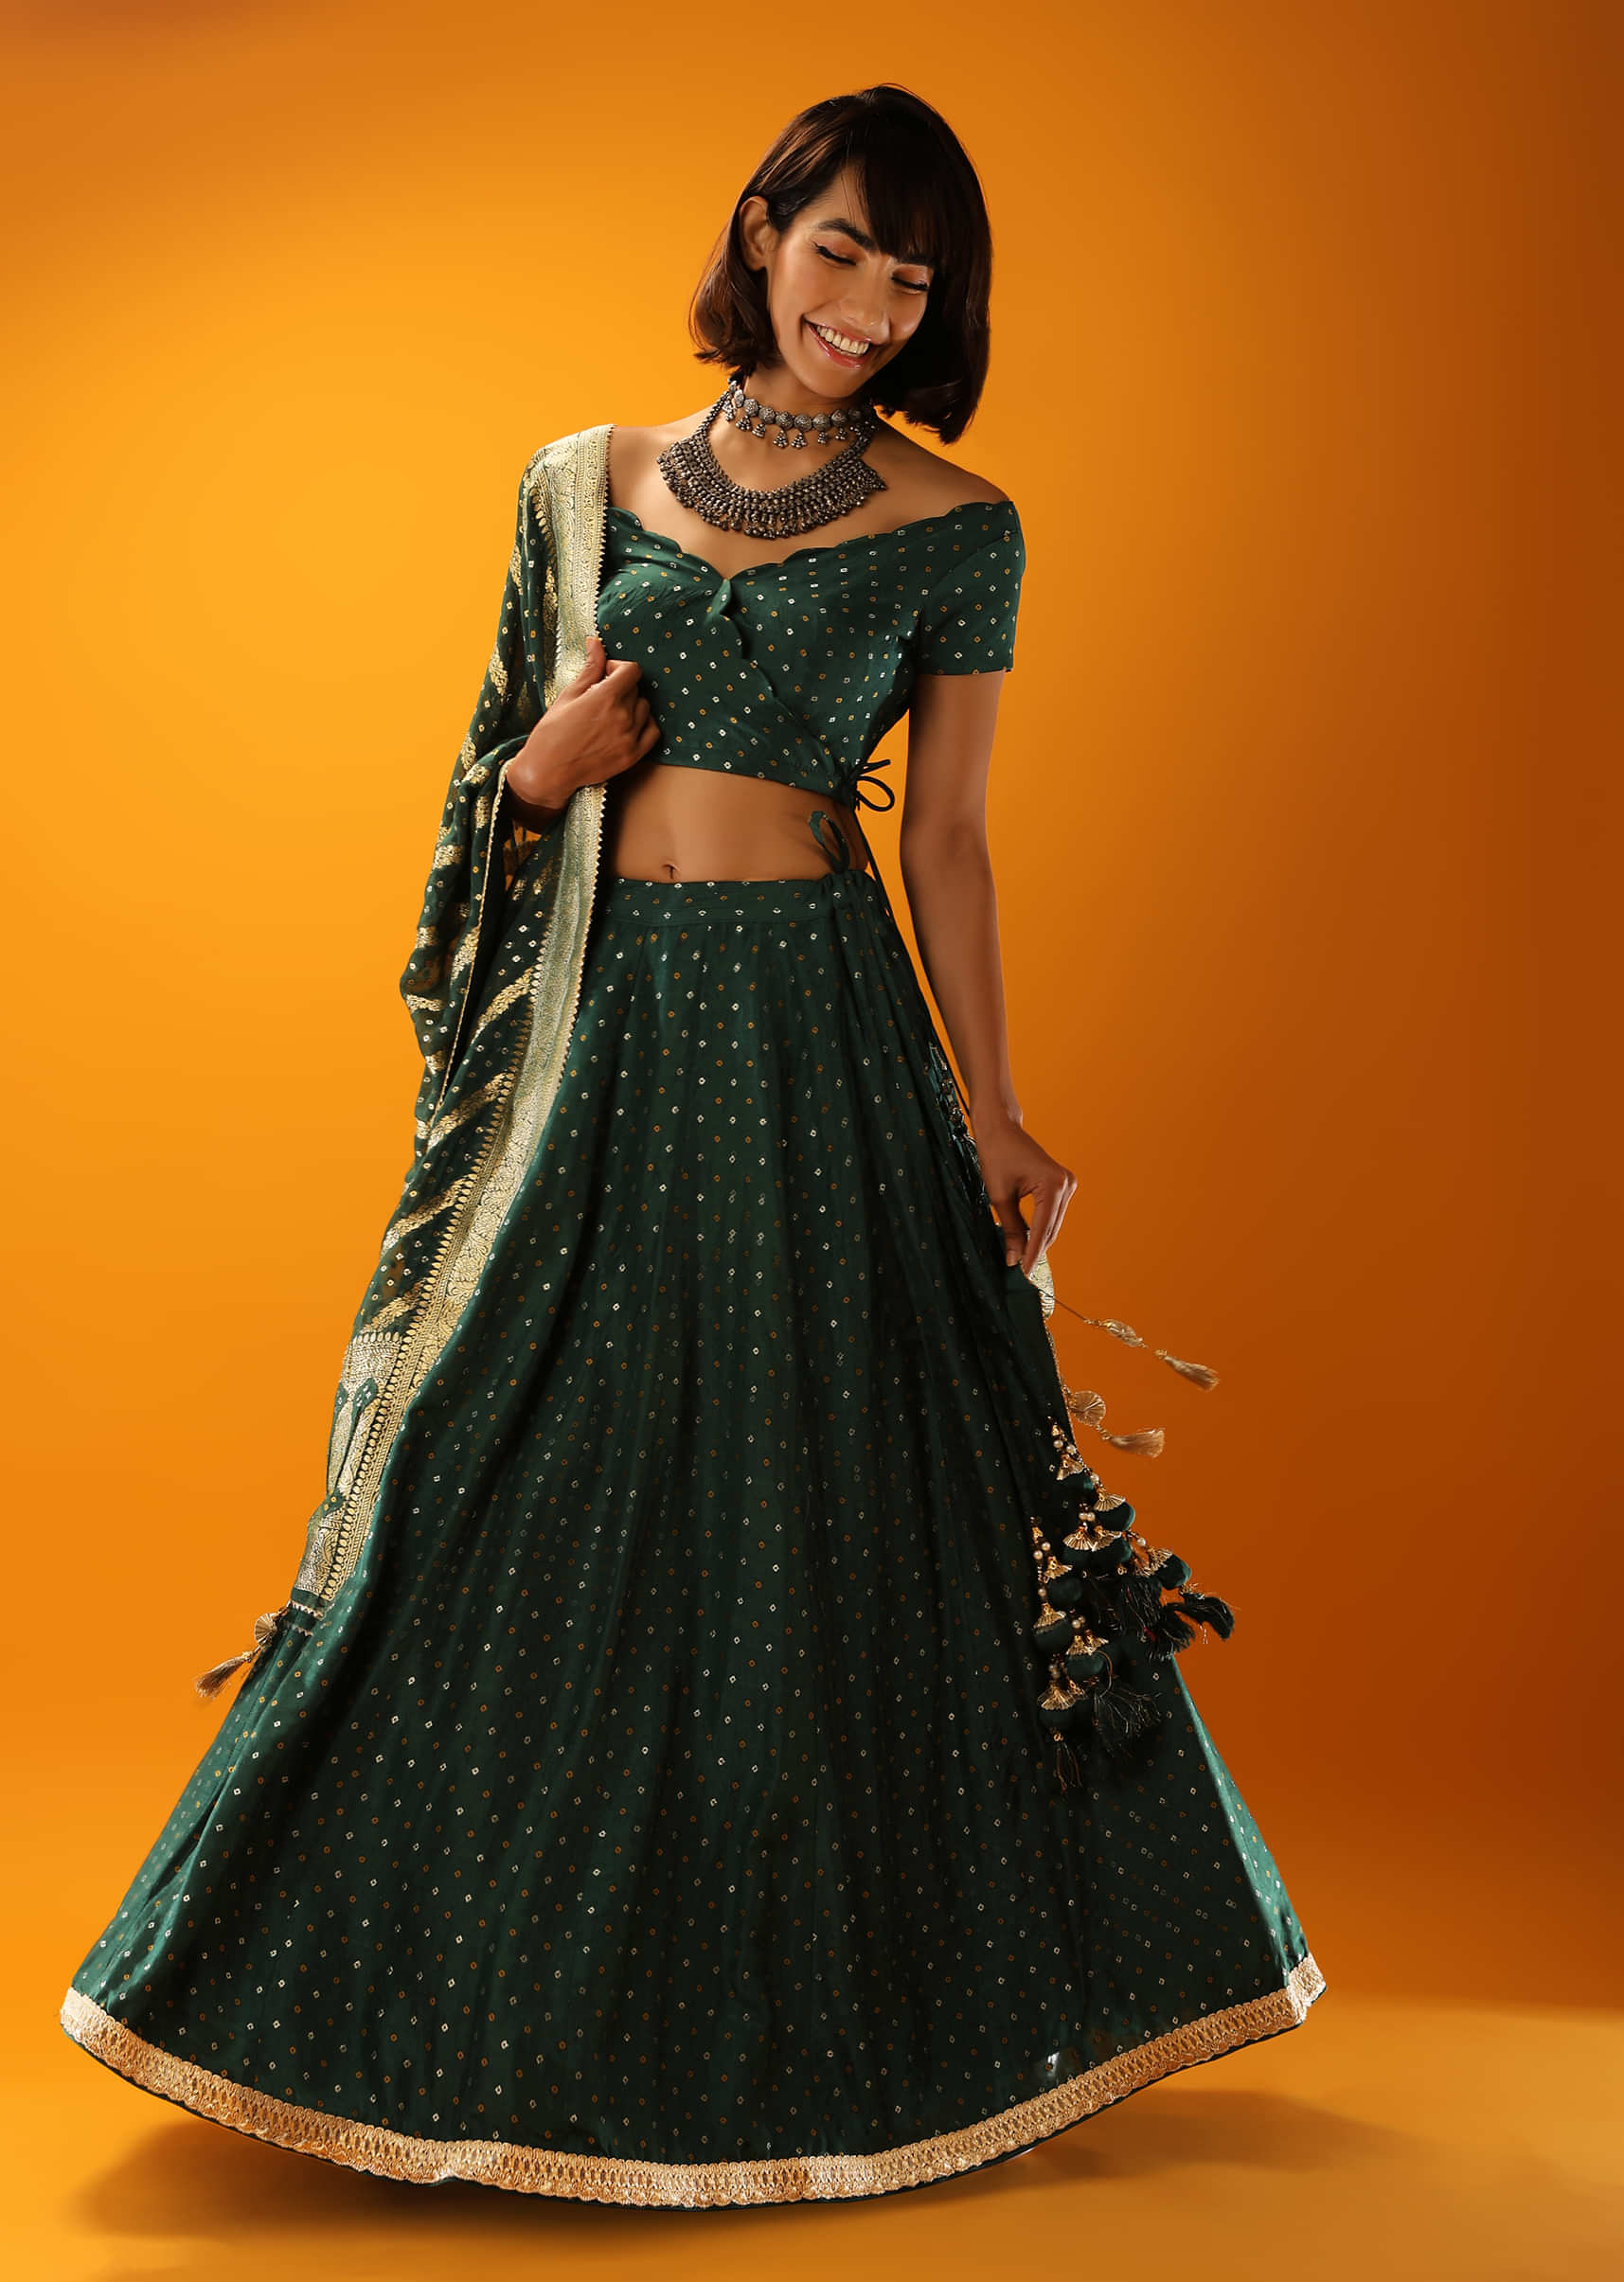 Alpine Green Lehenga In Brocade Silk With Woven Bandhani Design And Unstitched Blouse 